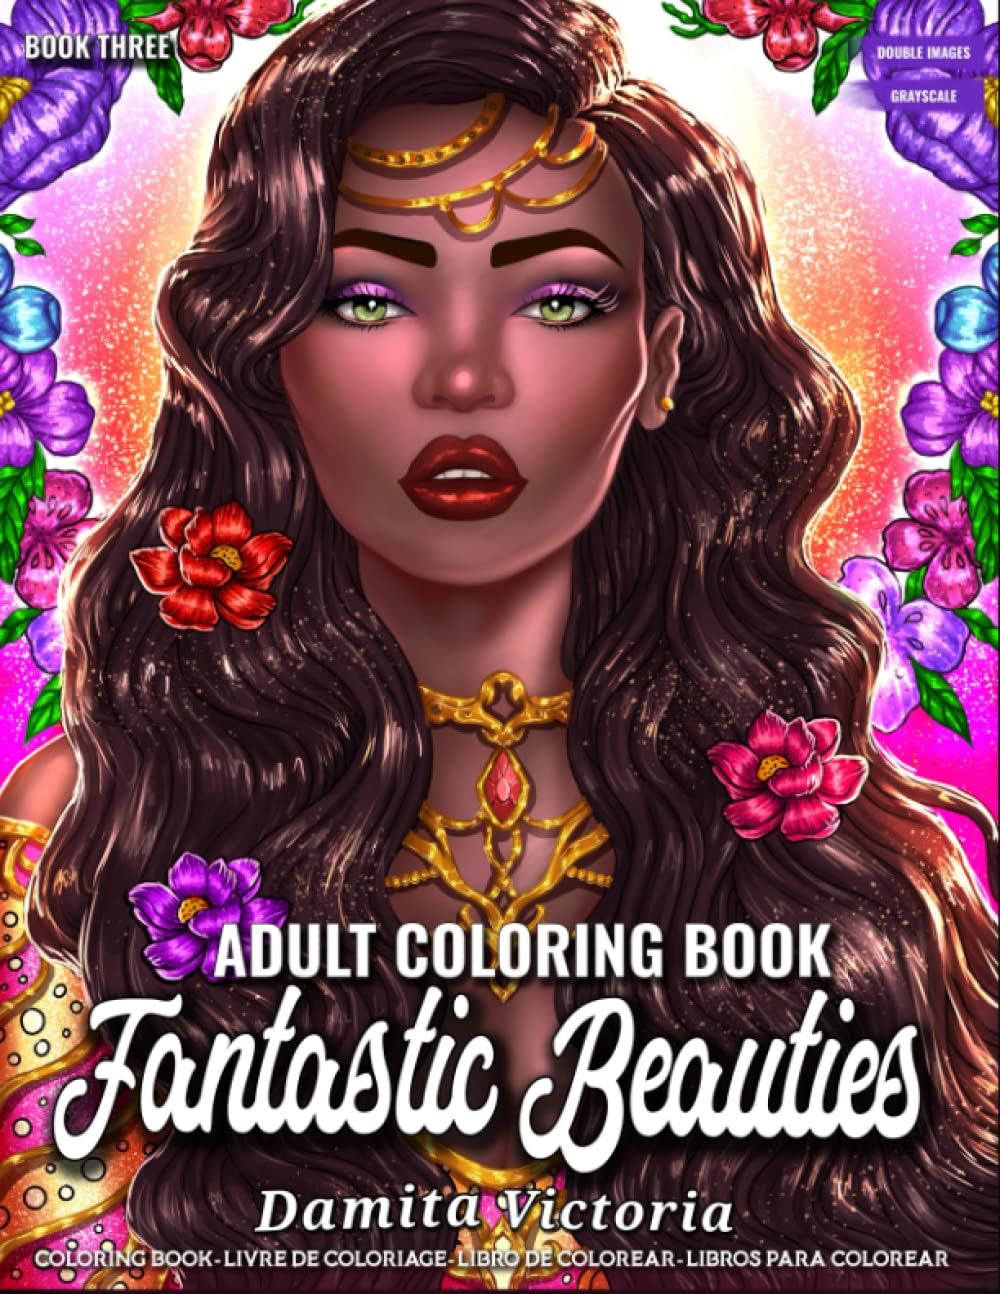 Adult Coloring Book | Fantastic Beauties Book Three: Women Coloring Book for Adults Featuring a Beautiful Portrait Coloring Pages for Adults Relaxation